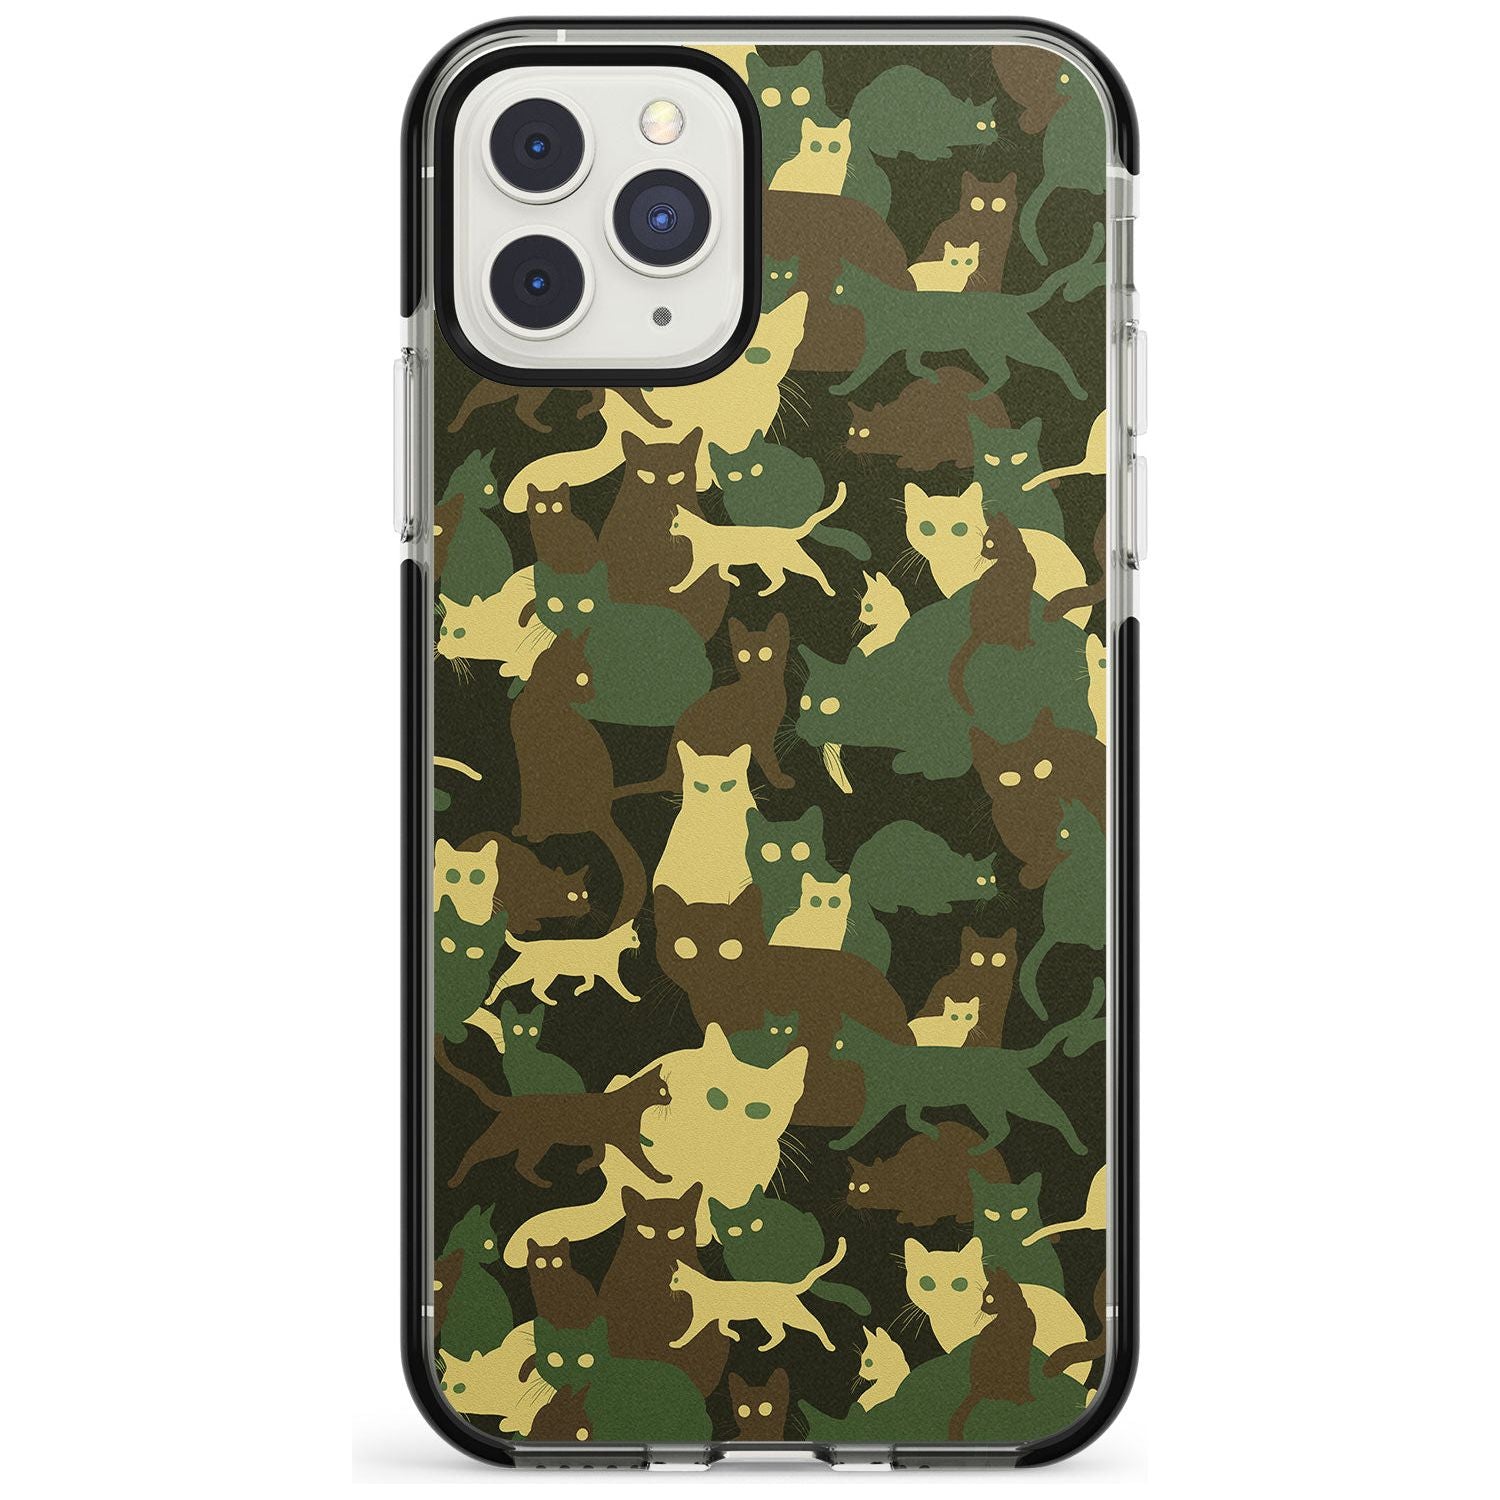 Forest Green Cat Camouflage Pattern Black Impact Phone Case for iPhone 11 Pro Max